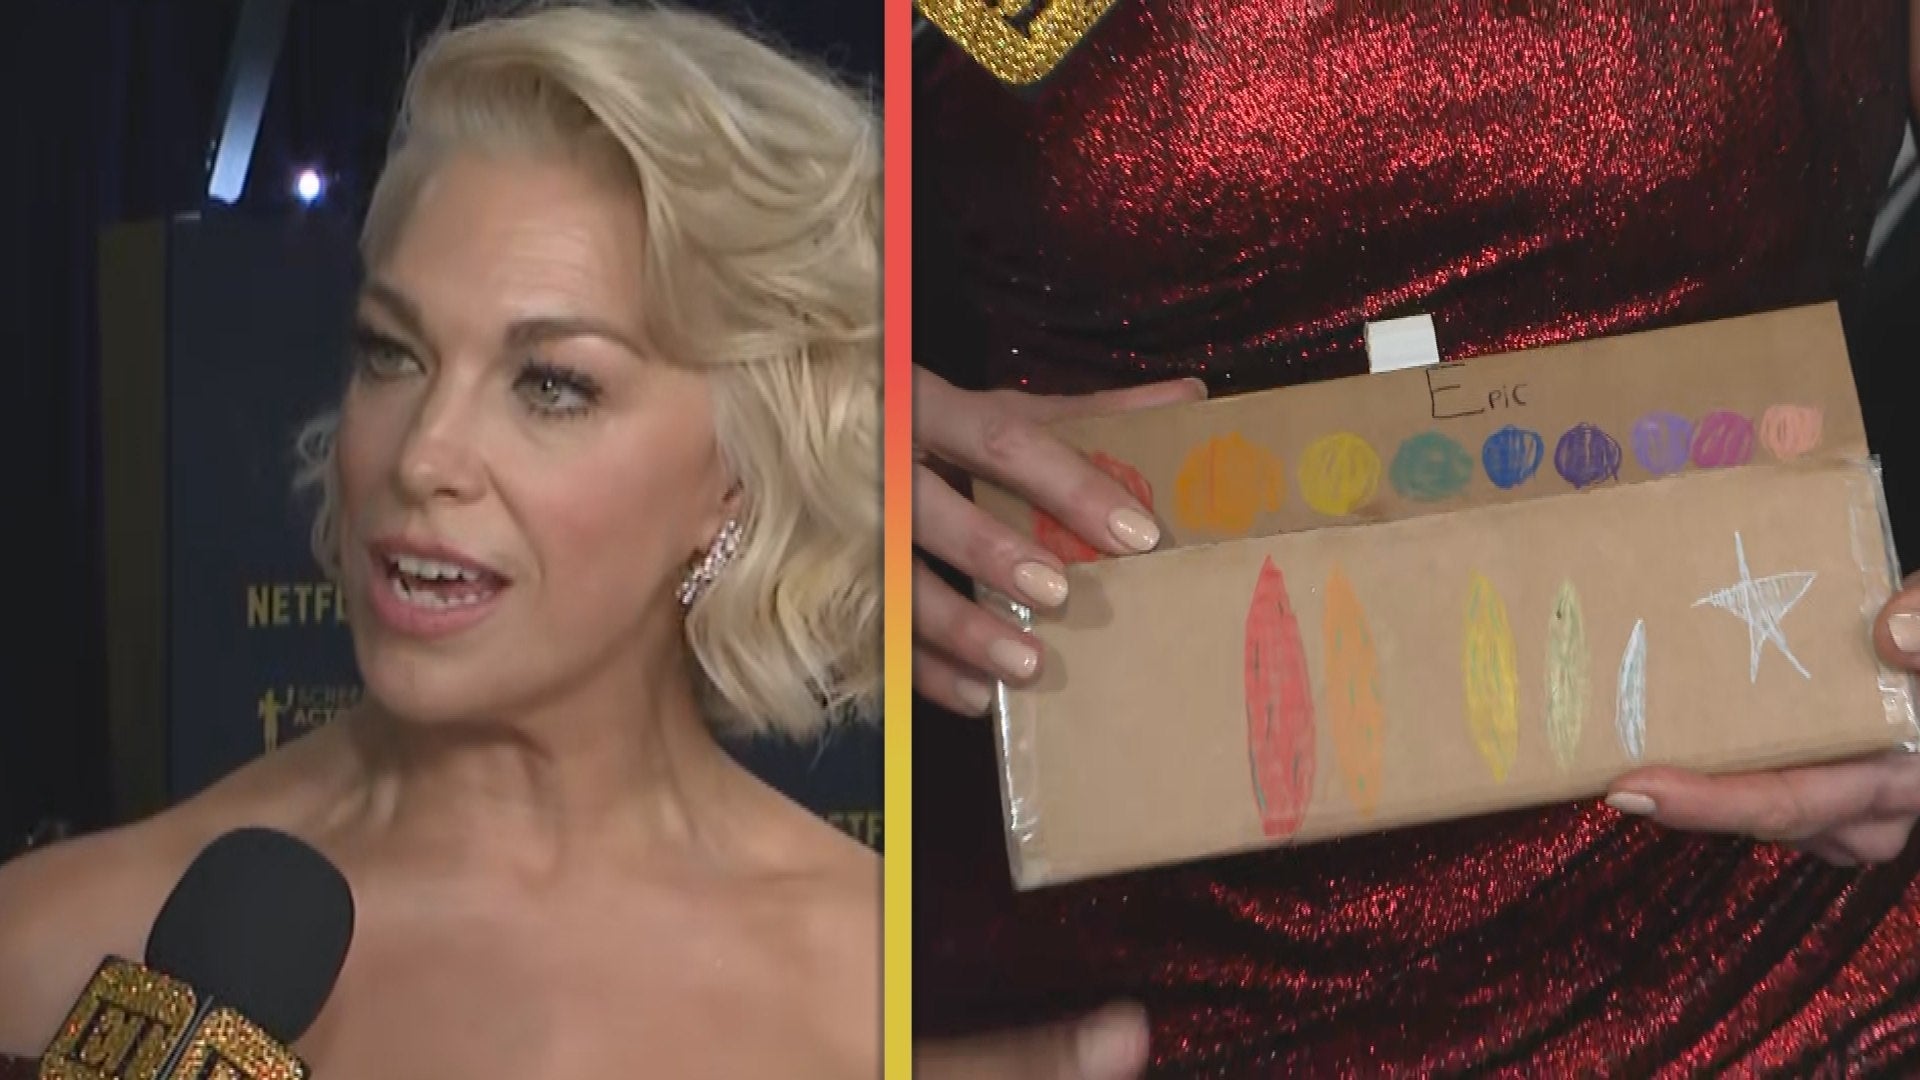 Hannah Waddingham on Why She Sported a Cardboard Purse at the SAG Awards (Exclusive)